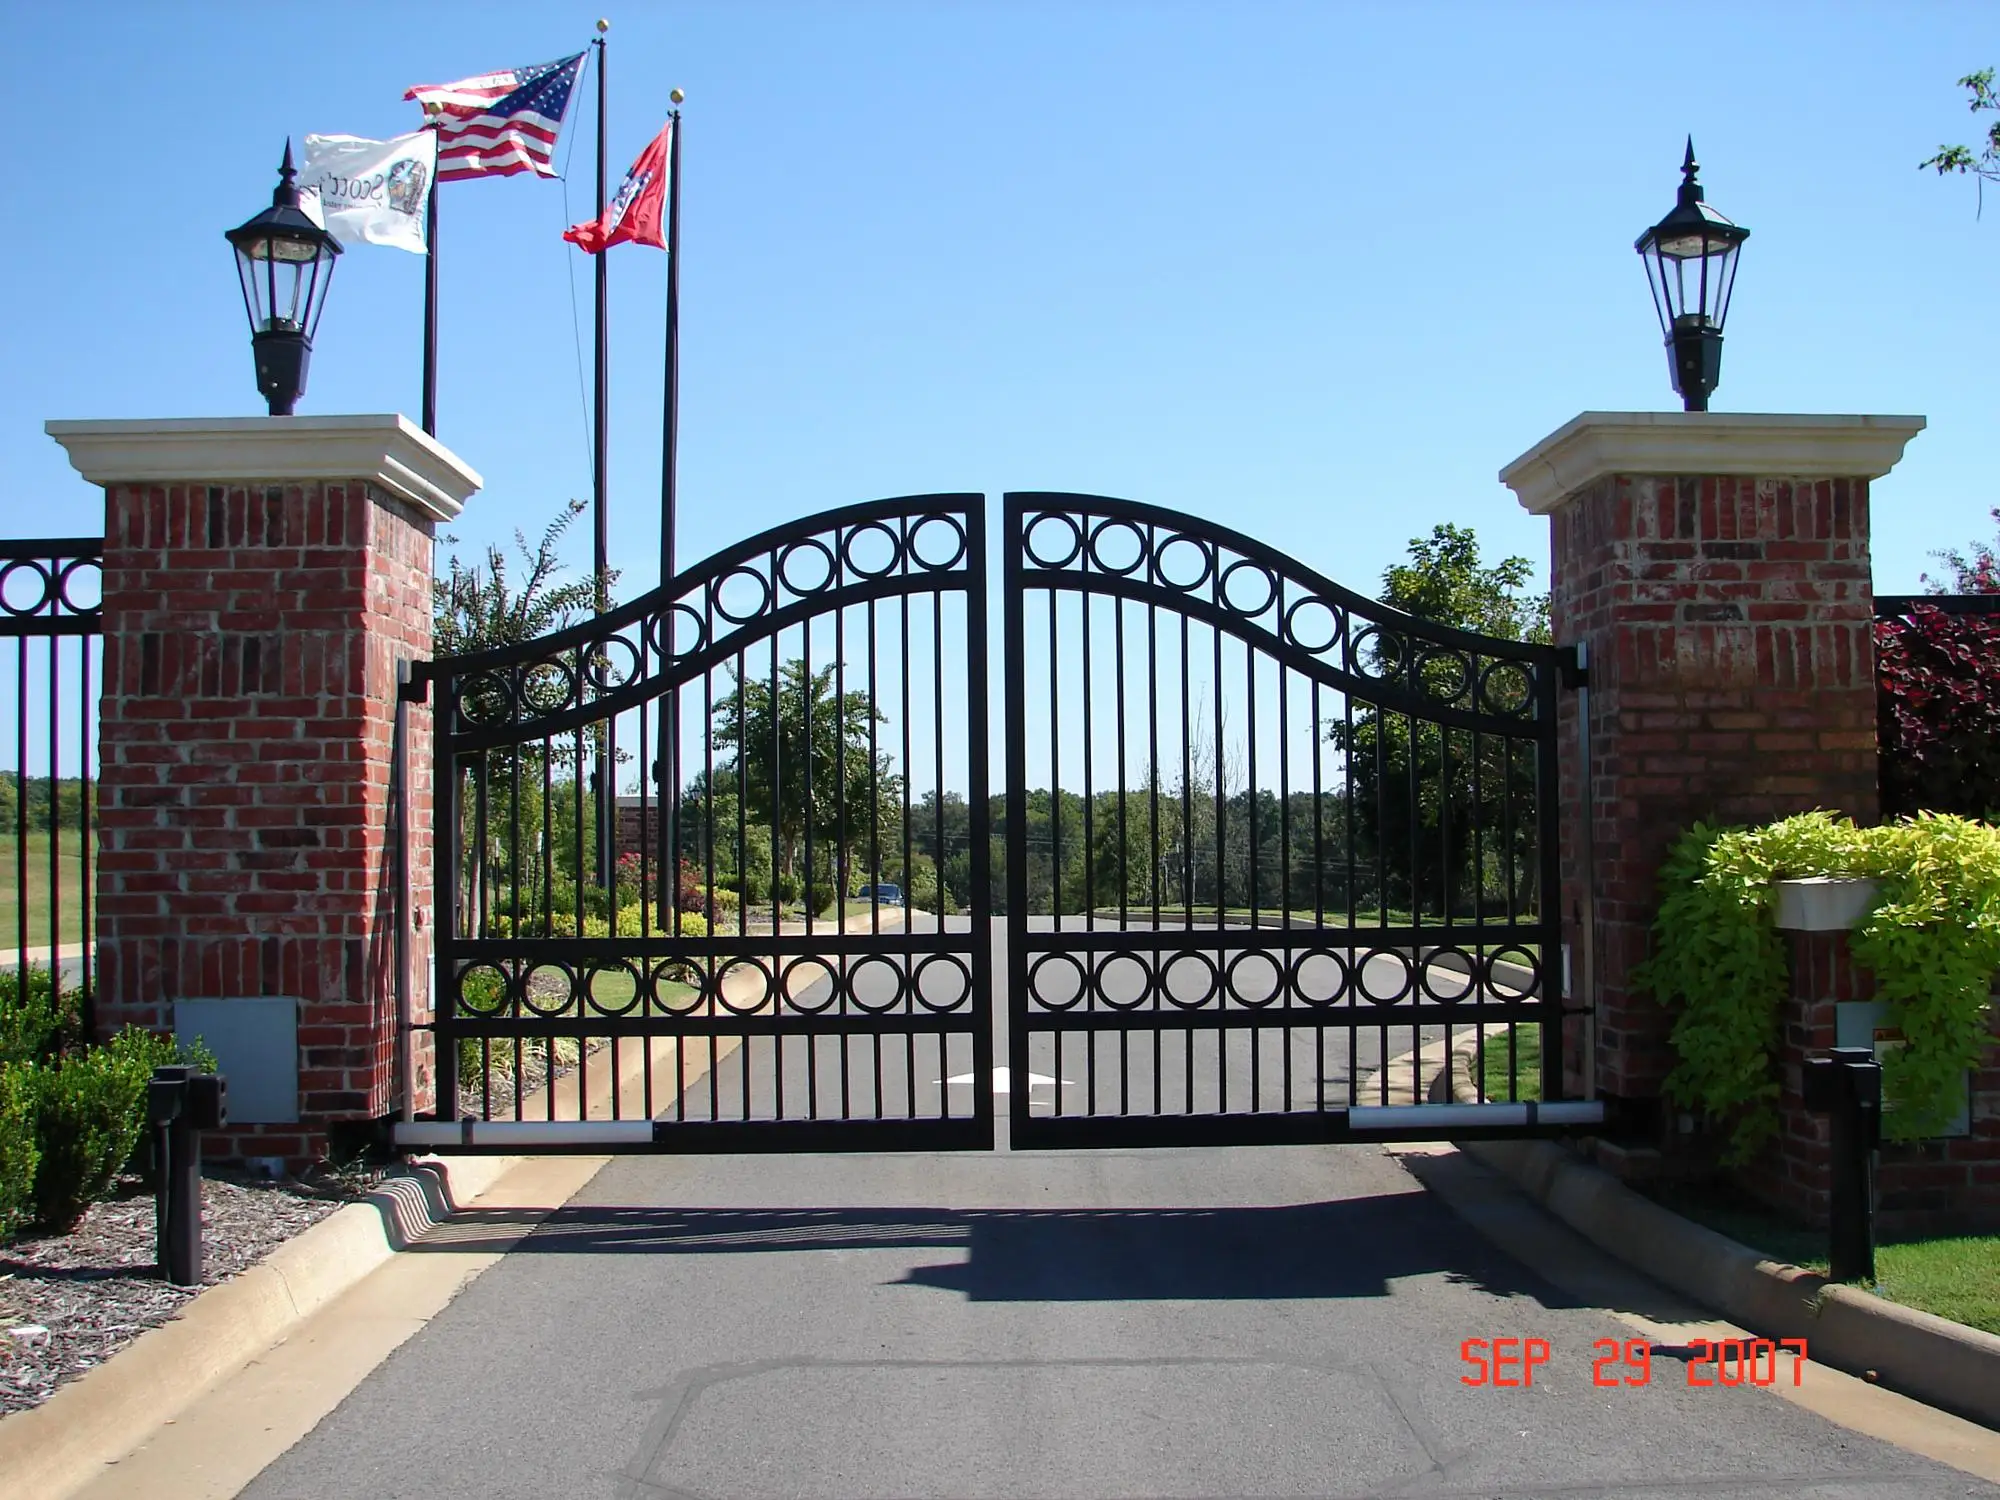 Conmmercial Iron Gate Model Price Buy Gate Designs,Iron